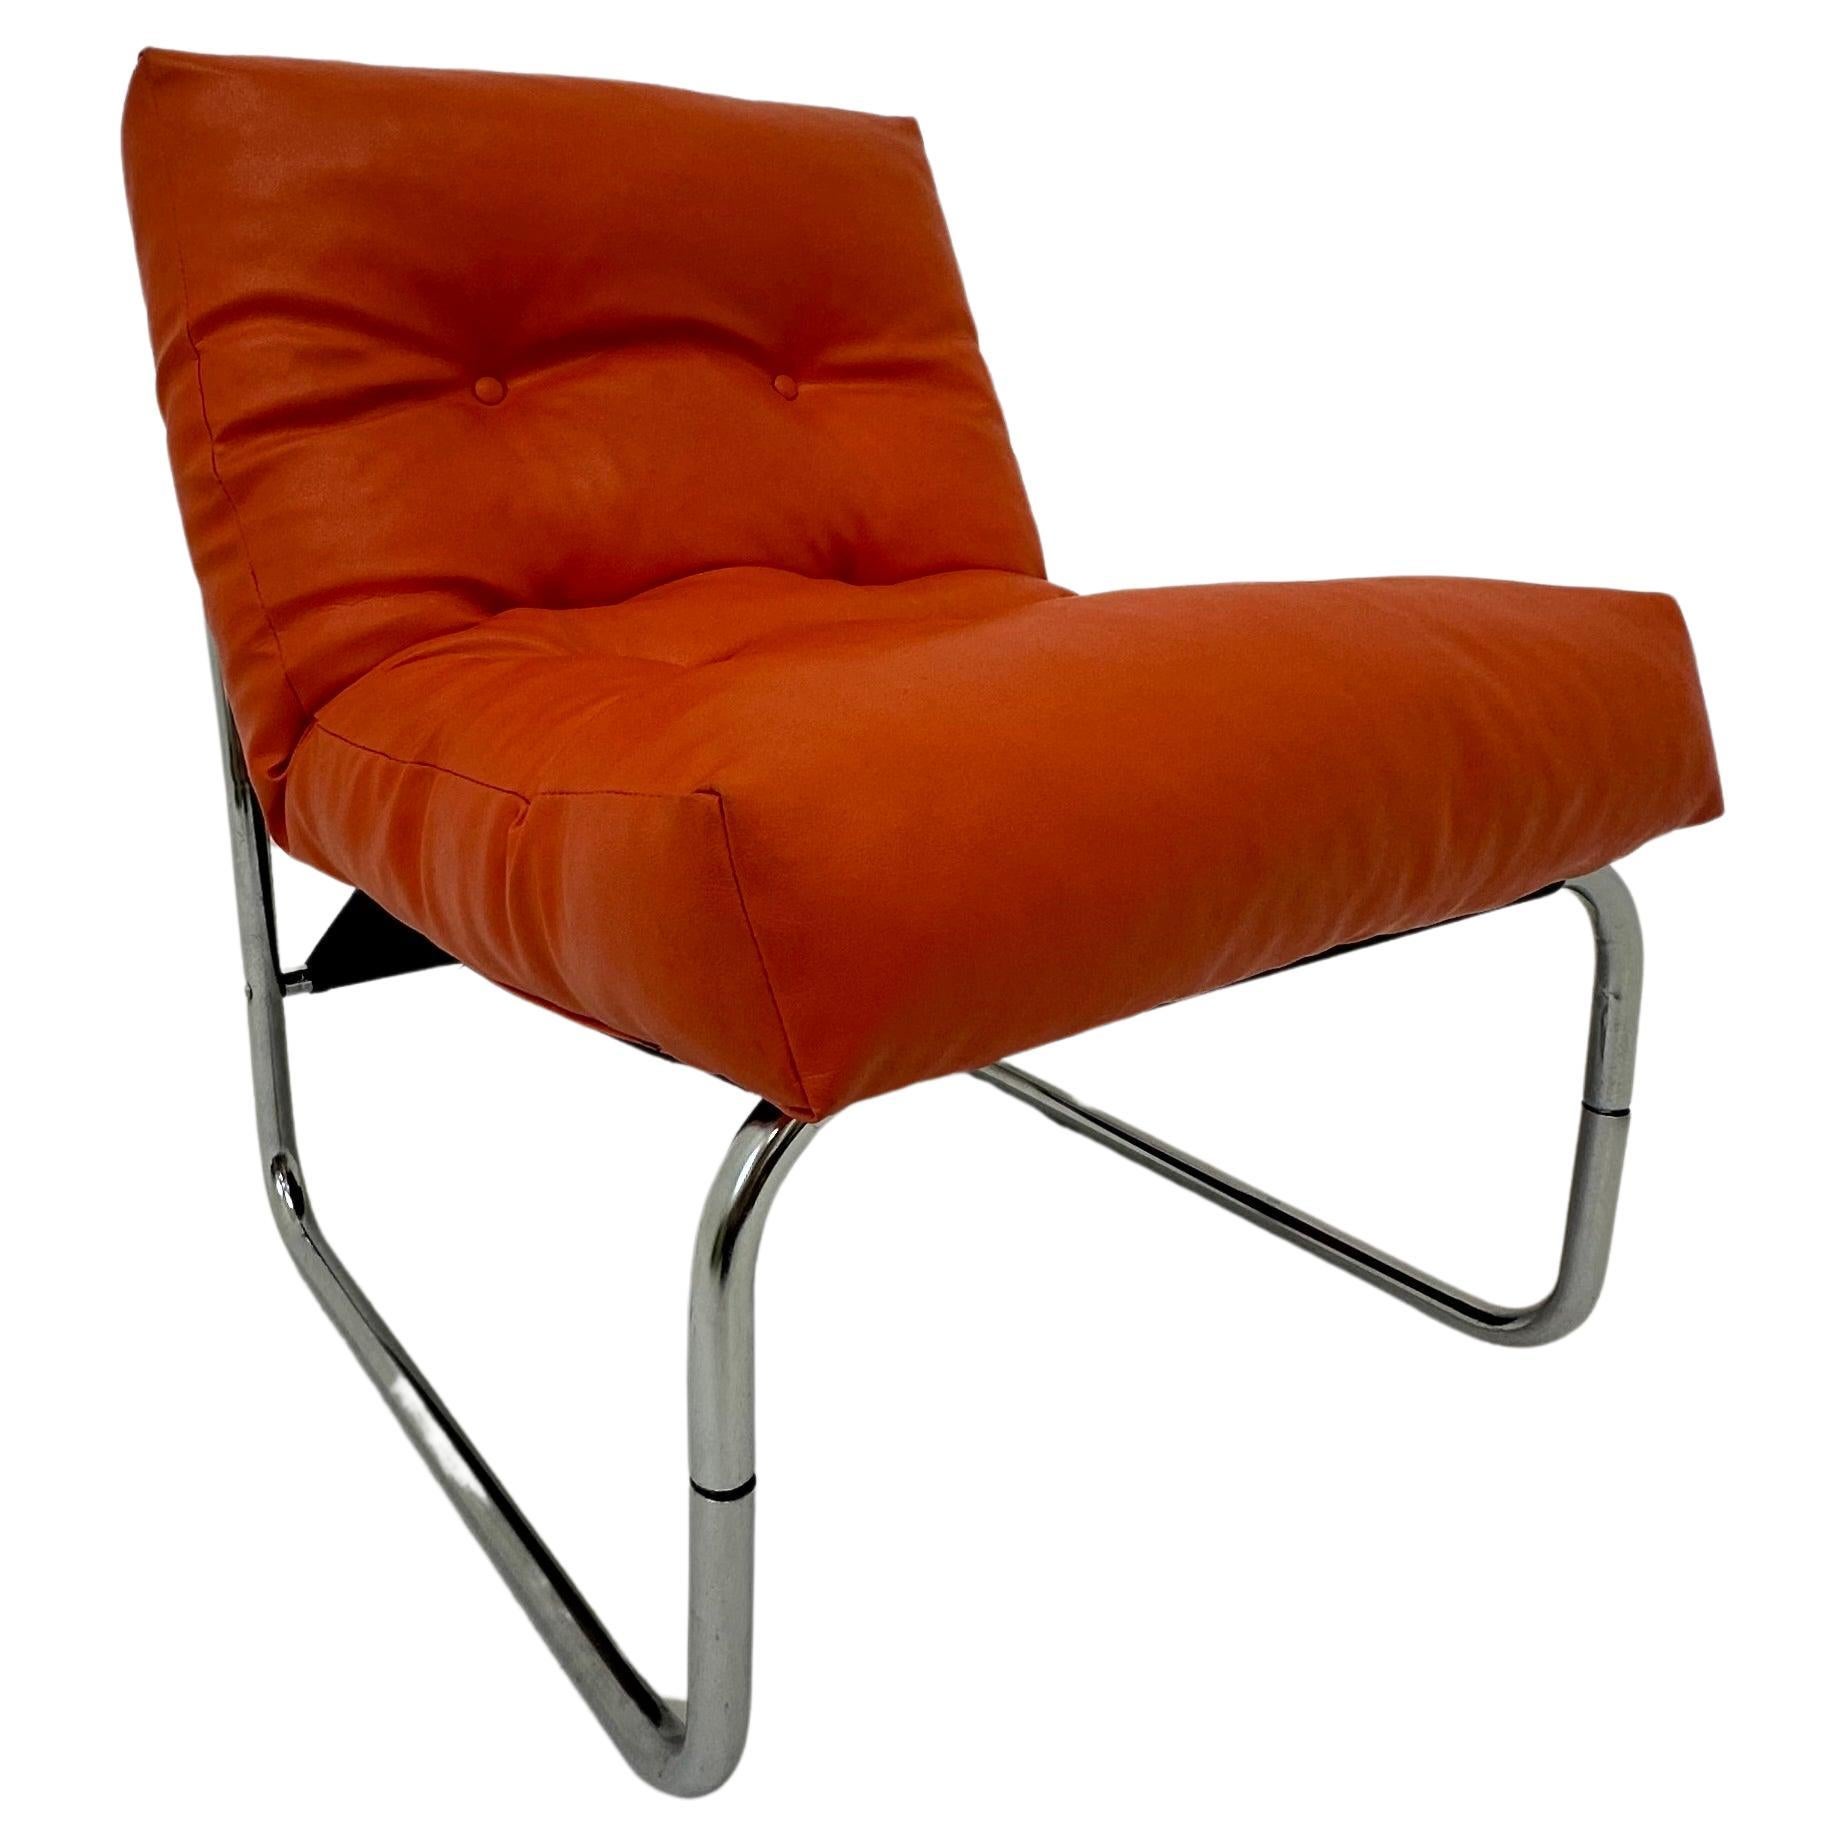 Rare lounge chair by Gillis Lundgren for Ikea, model “Pixi”, 1970s